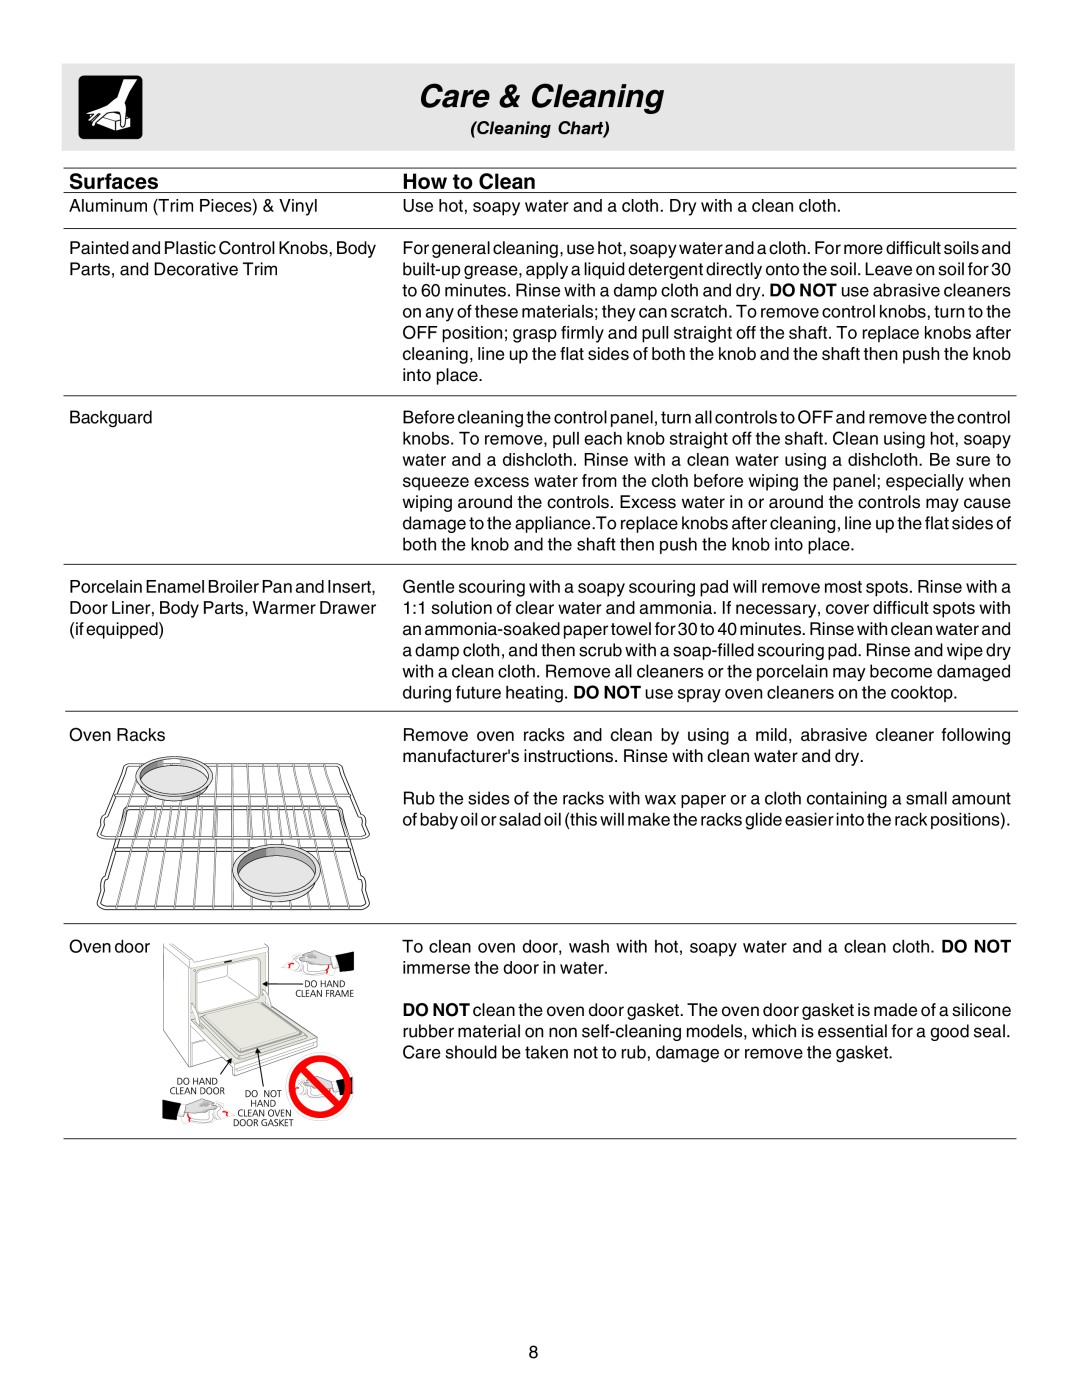 Crosley 316257131 manual Care & Cleaning, Surfaces, How to Clean, Cleaning Chart 